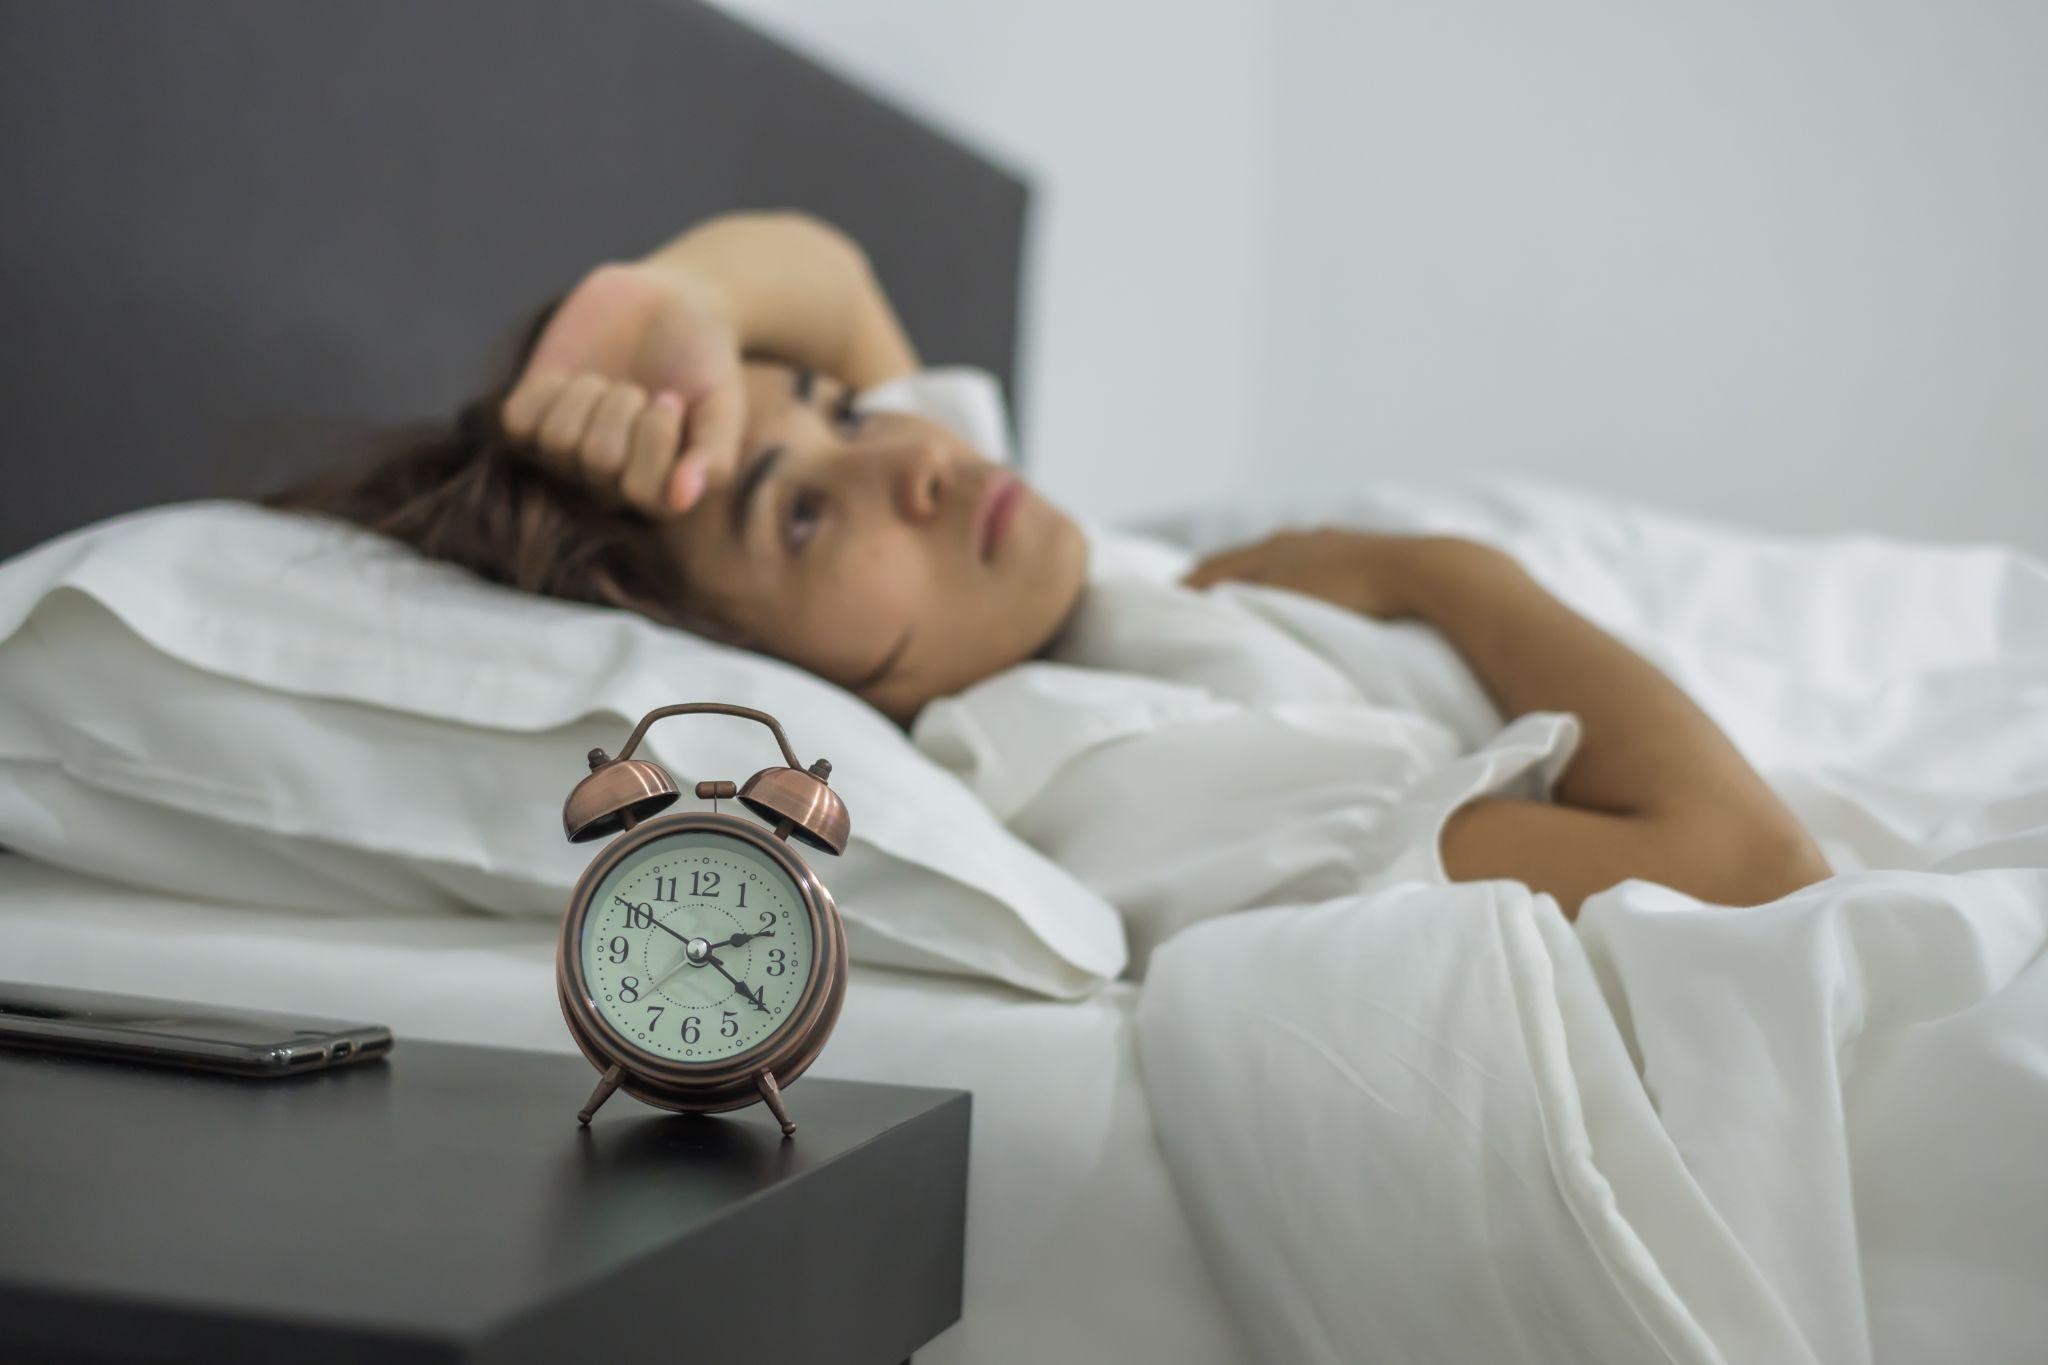 Modafinil and Sleep: What You Need to Know